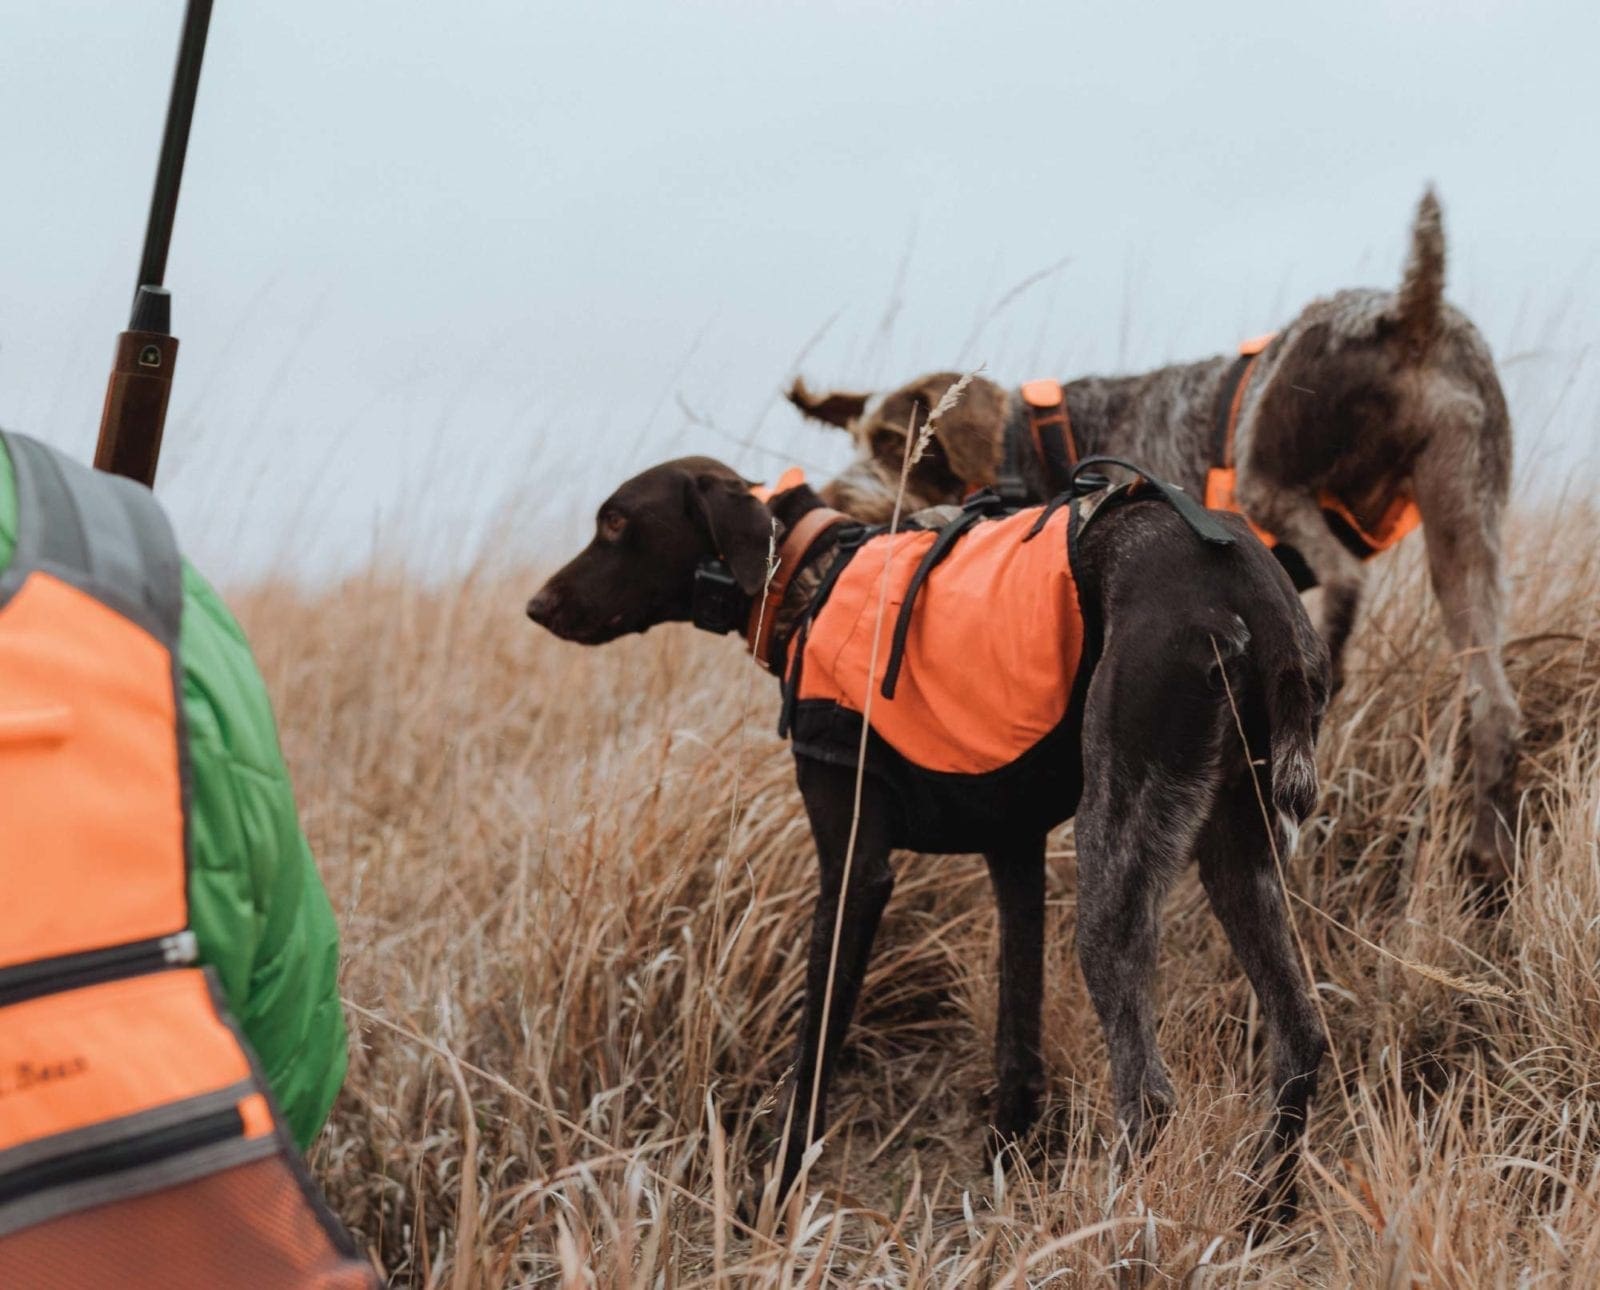 A hunter in the field with someone else's bird dogs on a hunt.